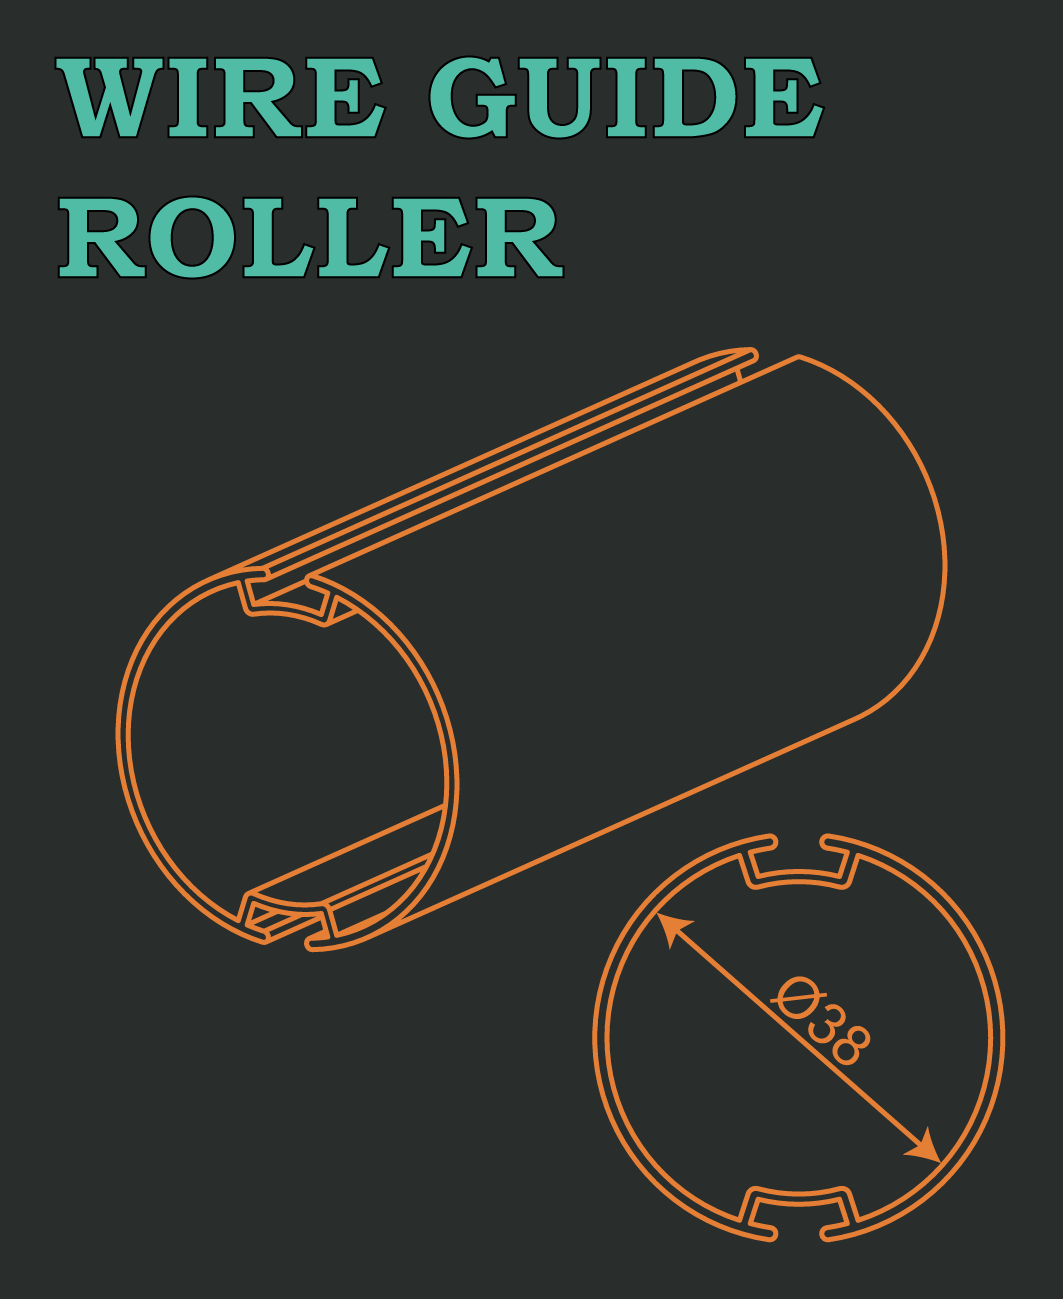 WIRE GUIDE ROLLER